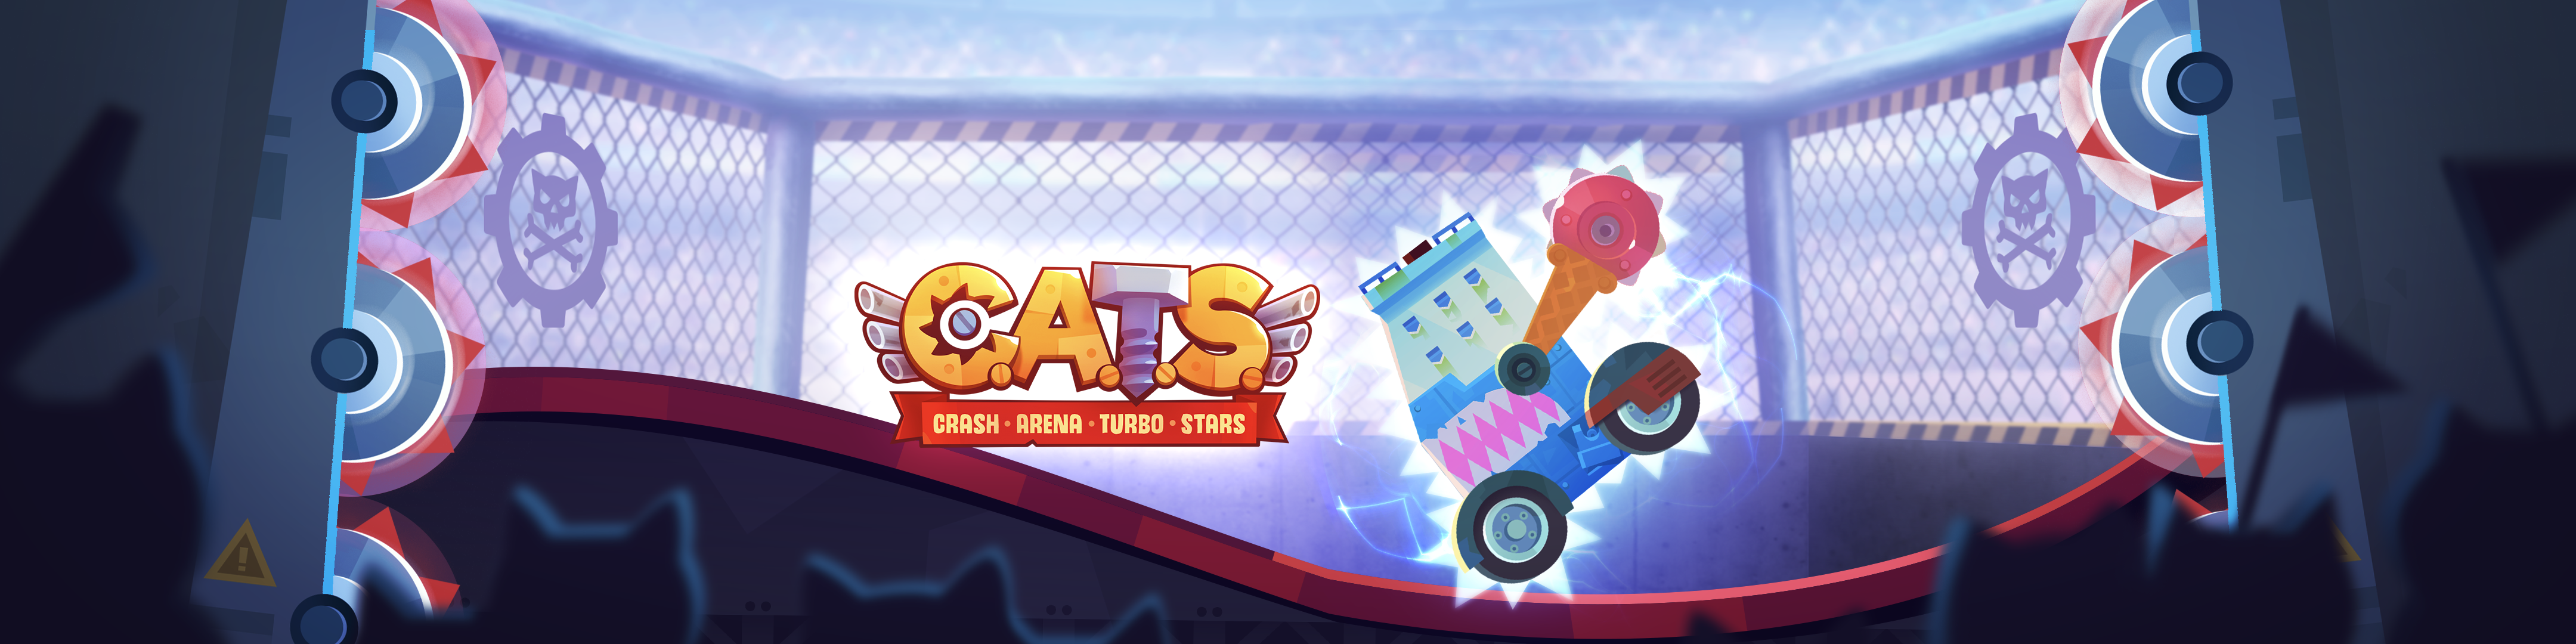 cats crash arena turbo stars play now without